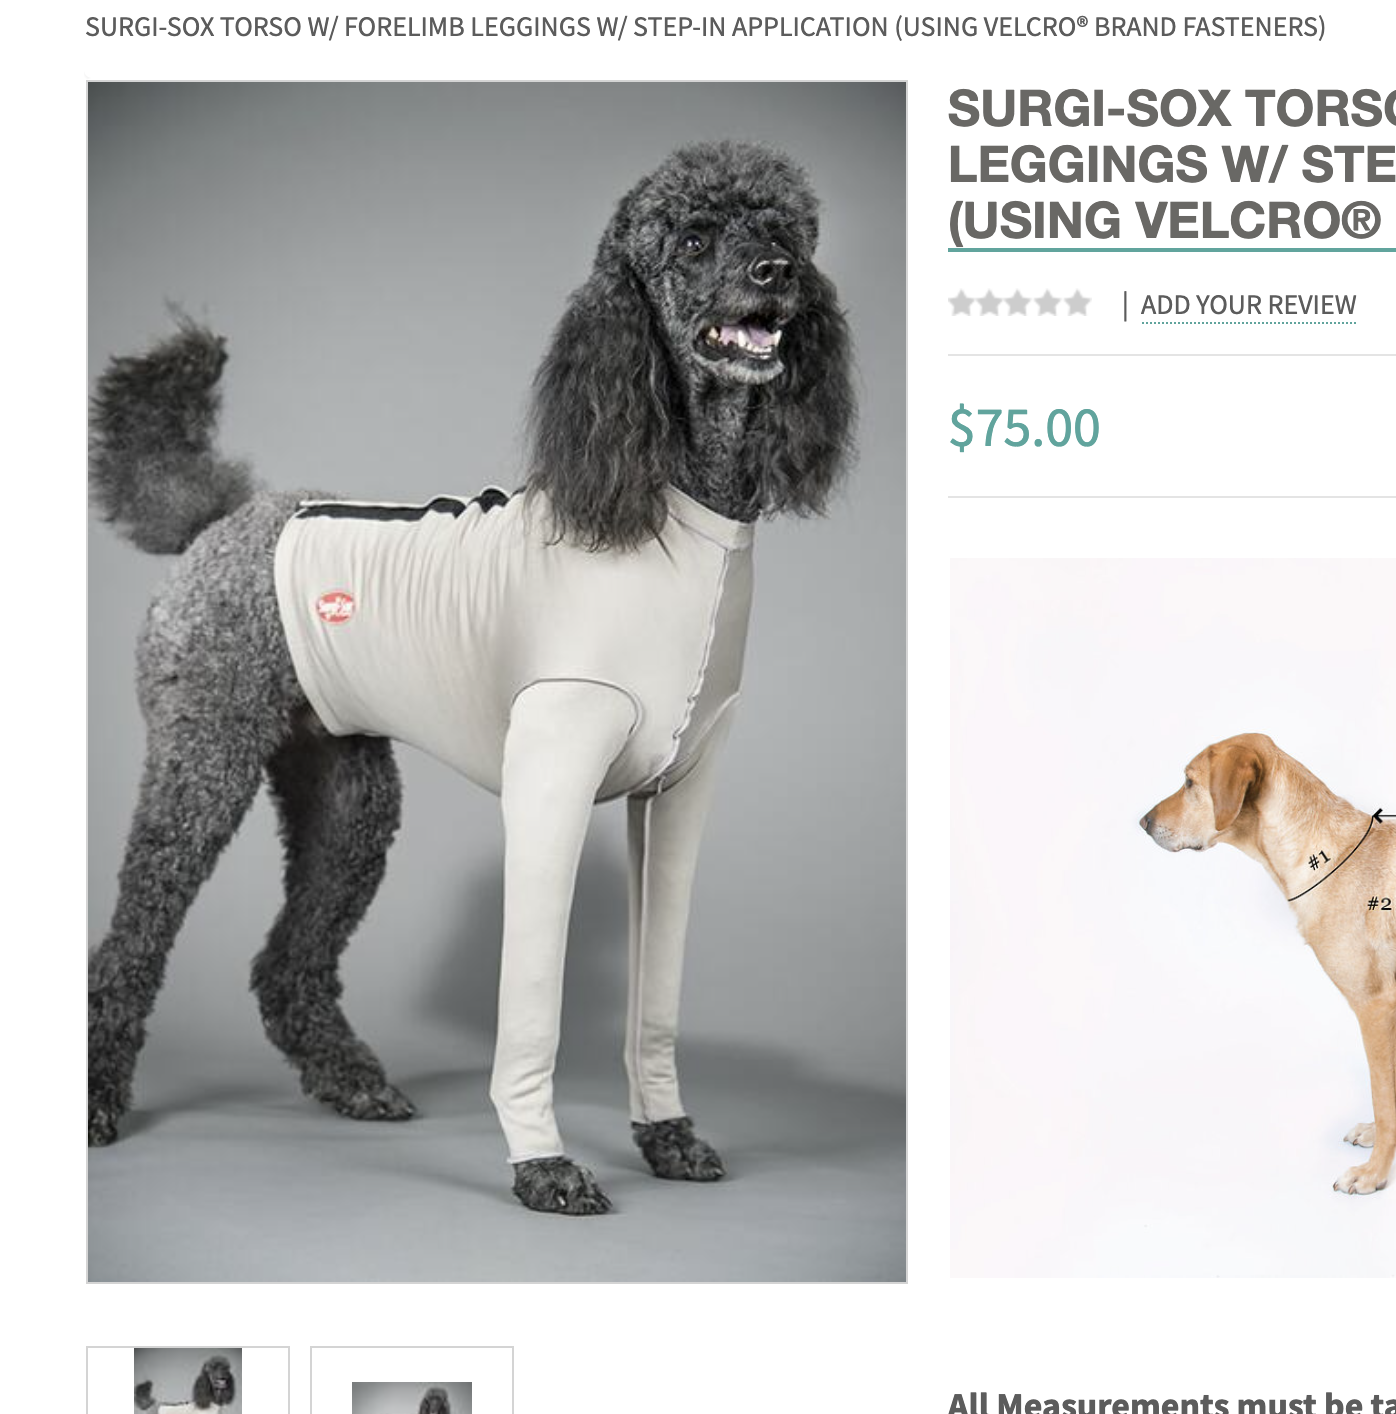 Screenshot of a product image for Surgi-sox featuring a grey standard poodle wearing what appears to be a Spandex shirt with forelimb sleeves